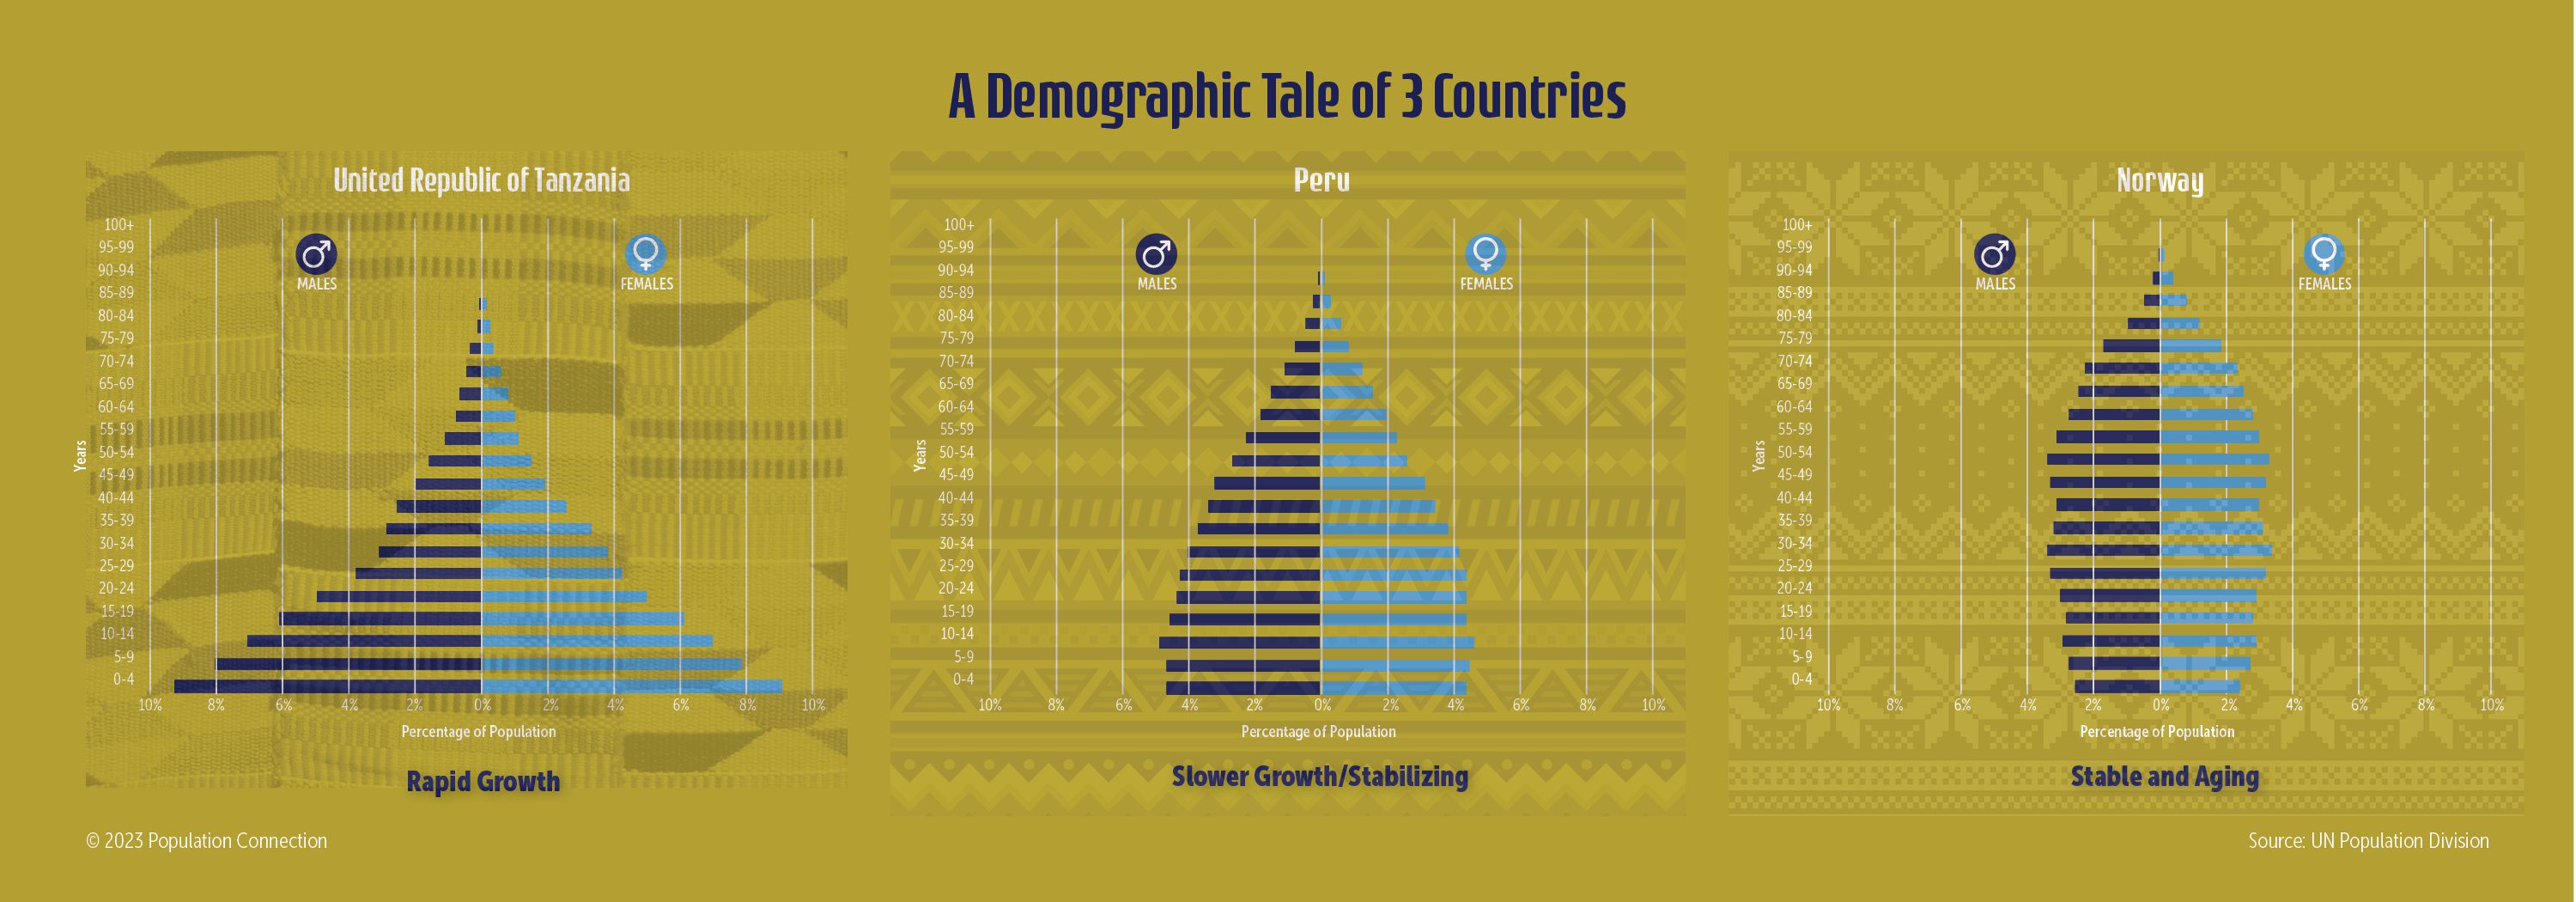 Population Pyramids For Tanzania Peru And Norway Infographic Population Education